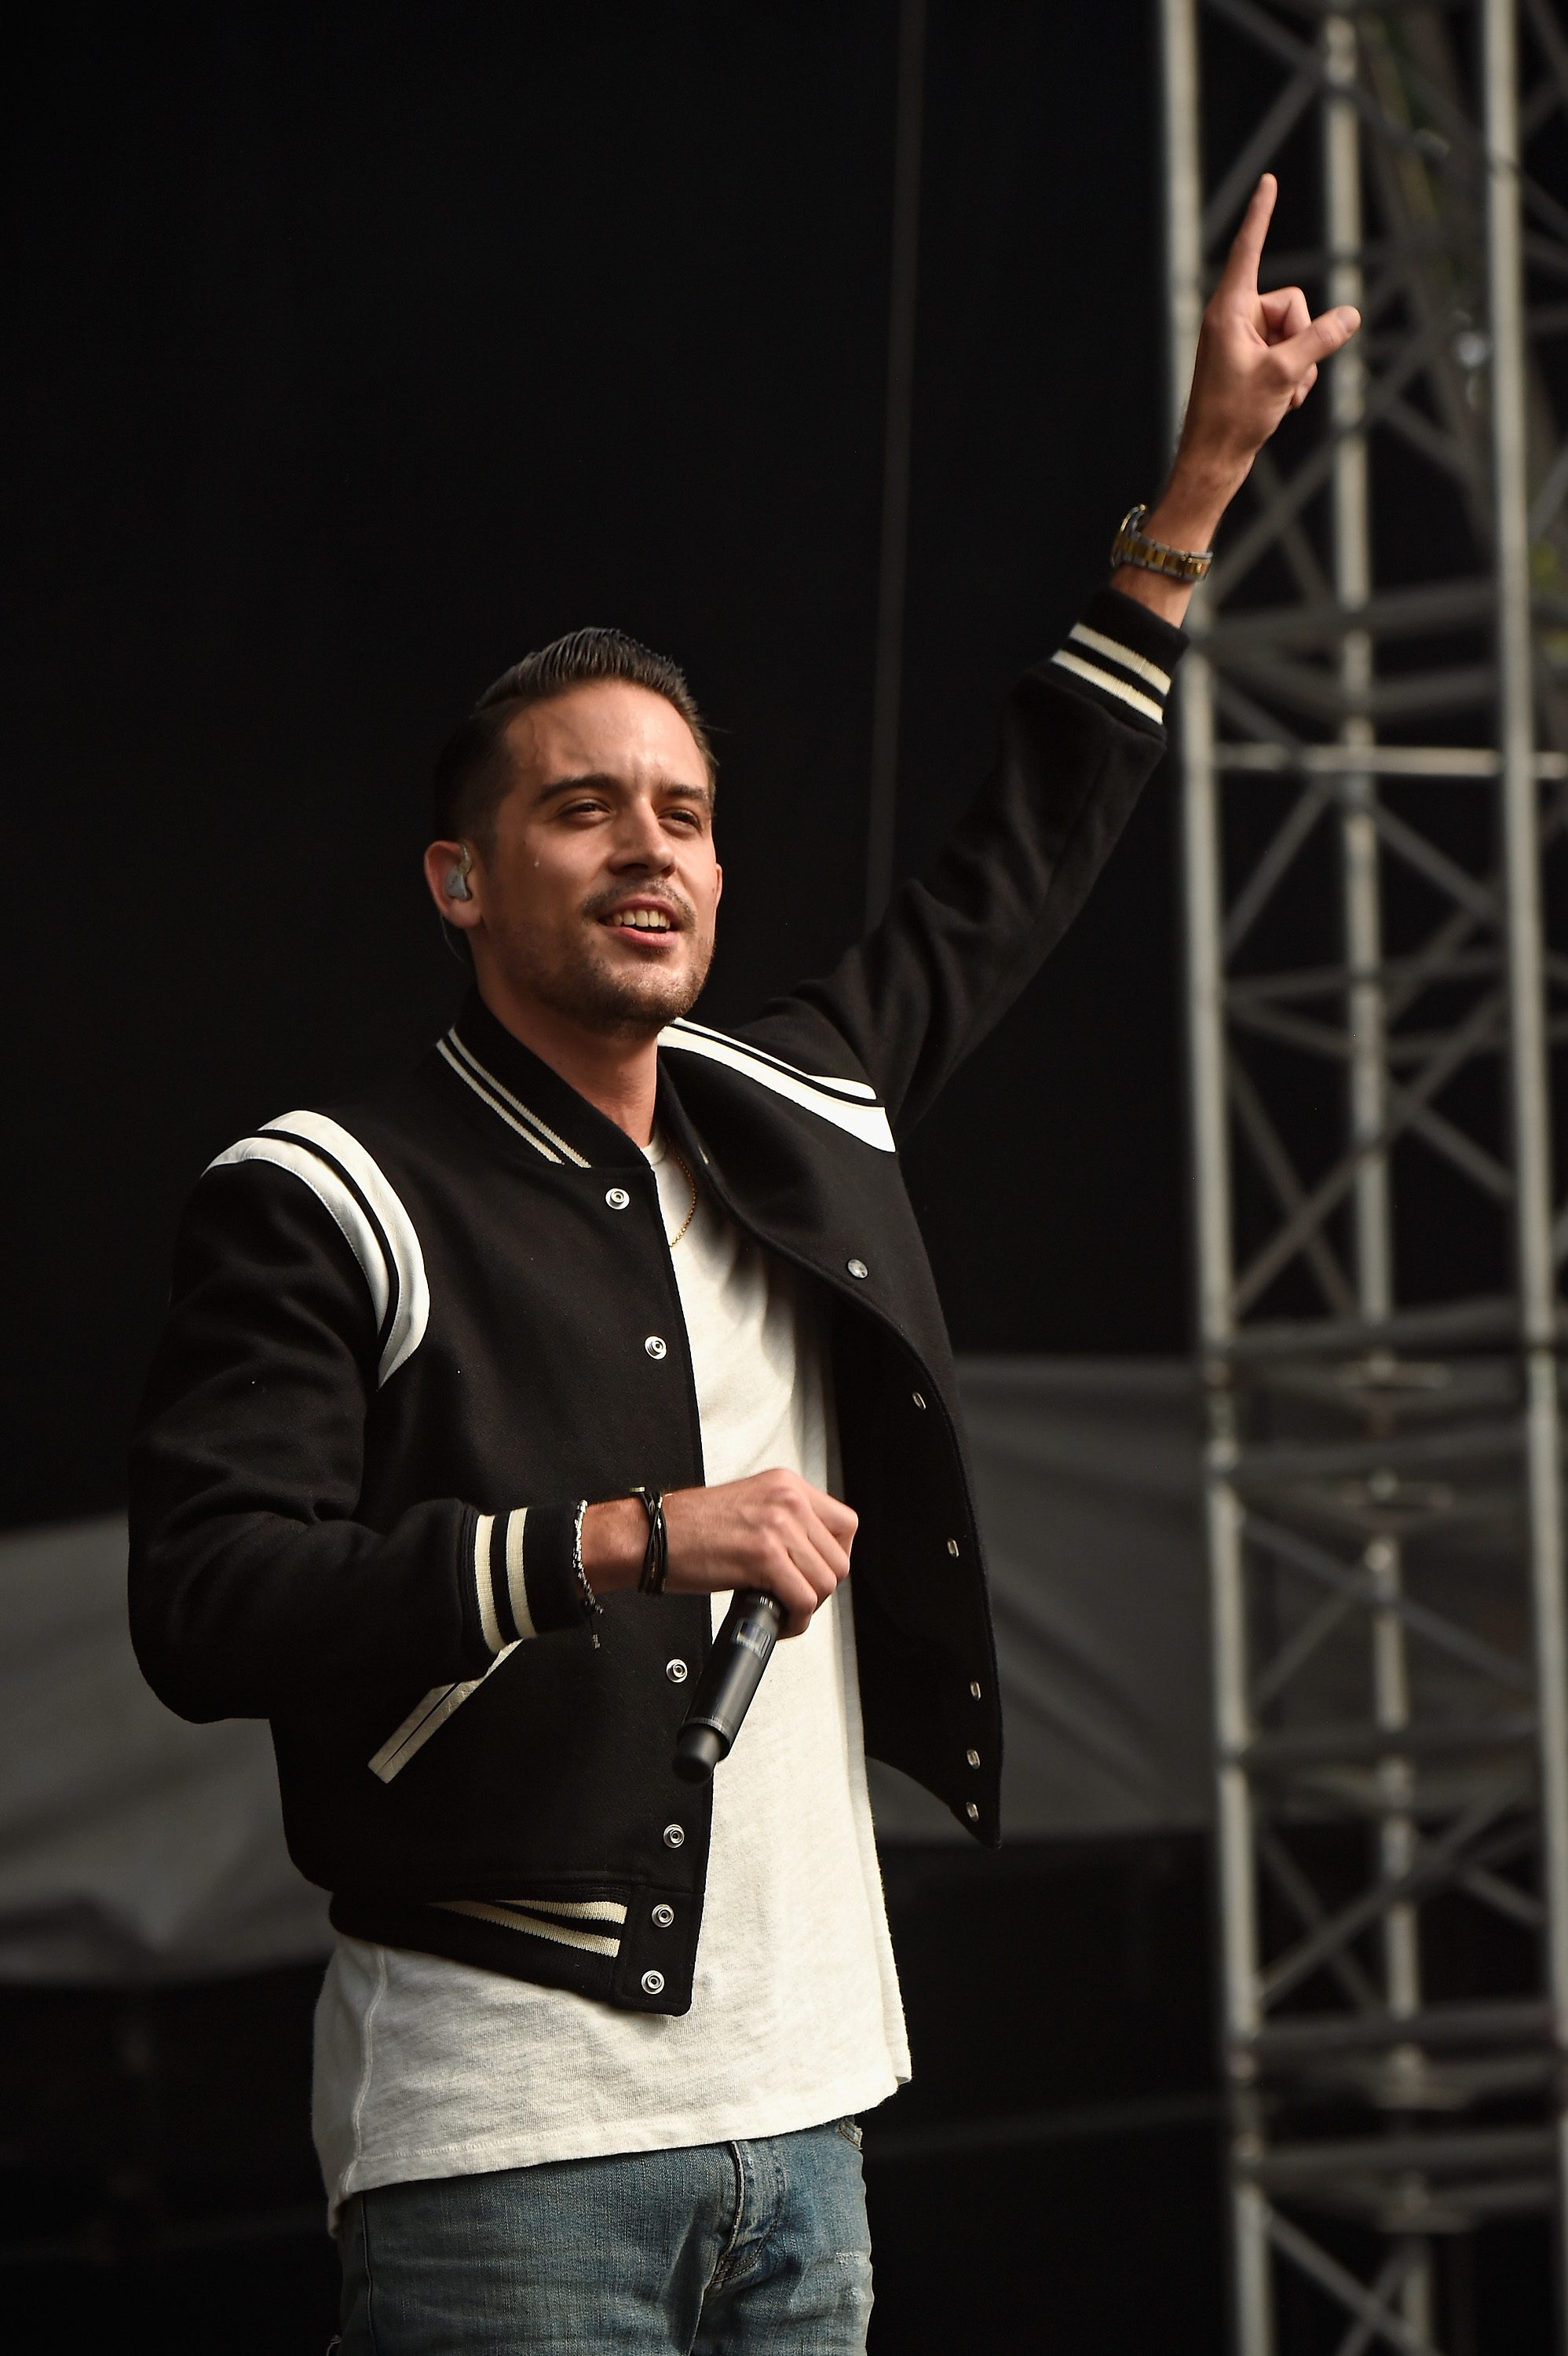 PHILADELPHIA, PA - SEPTEMBER 05:  G-Eazy performs onstage during the 2015 Budweiser Made in America Festival at Benjamin Franklin Parkway on September 5, 2015 in Philadelphia, Pennsylvania.  (Photo by Kevin Mazur/Getty Images for Anheuser-Busch)